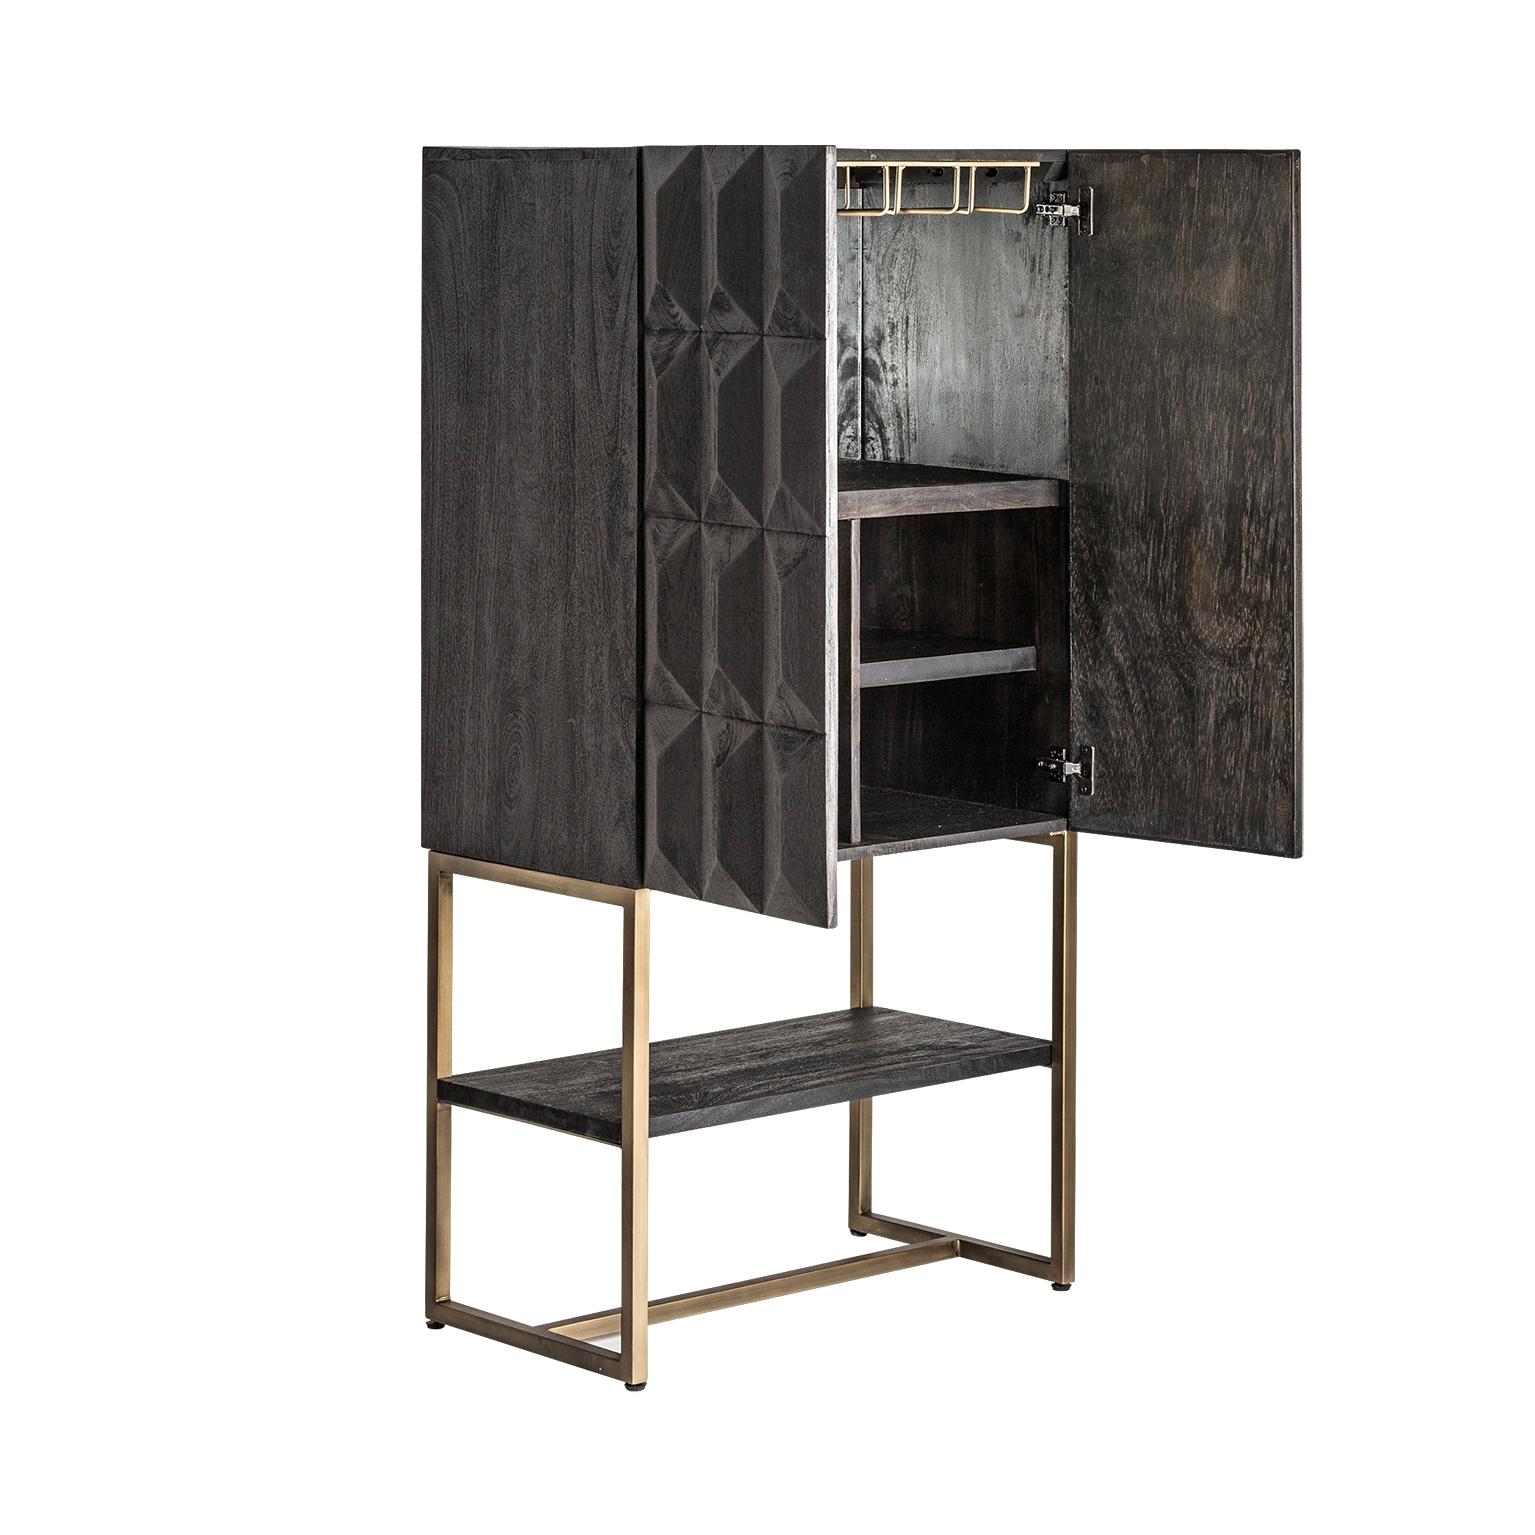 European Black Wooden Dry Bar Cabinet Brutalist Style with Graphic Patterns